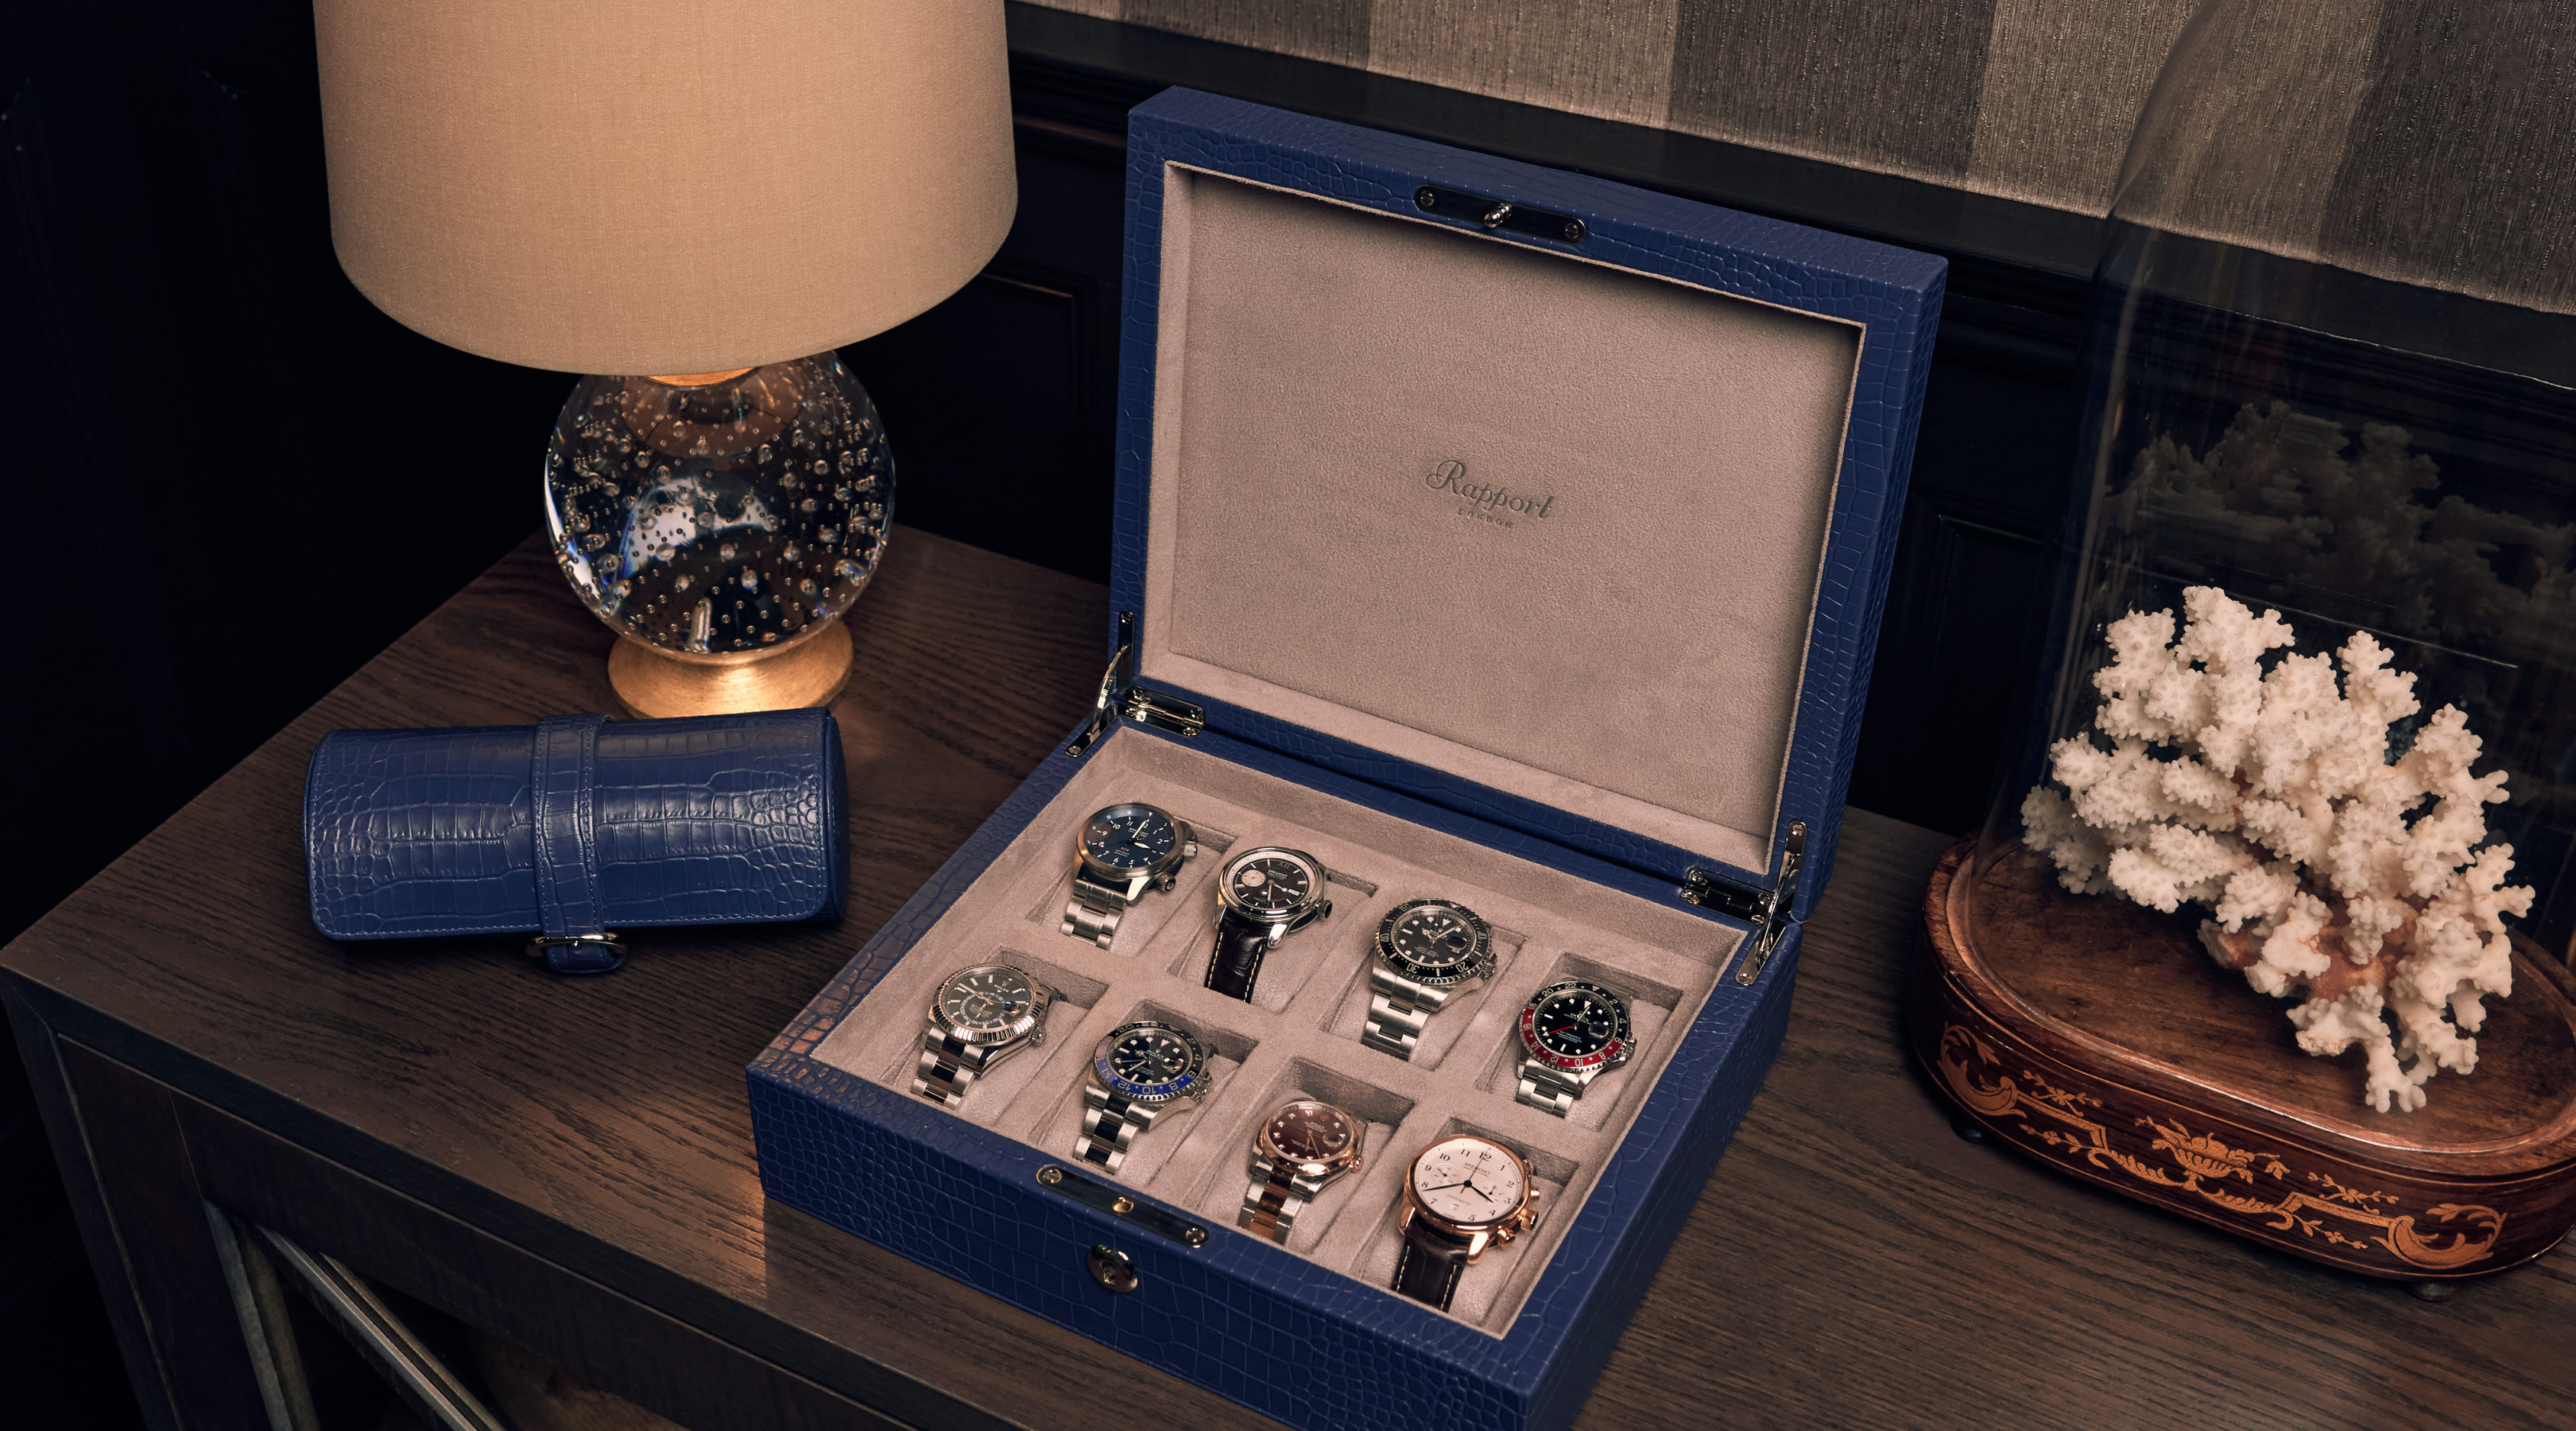 Article: More than just Simple Timepieces - Looking after Your Family Heirlooms